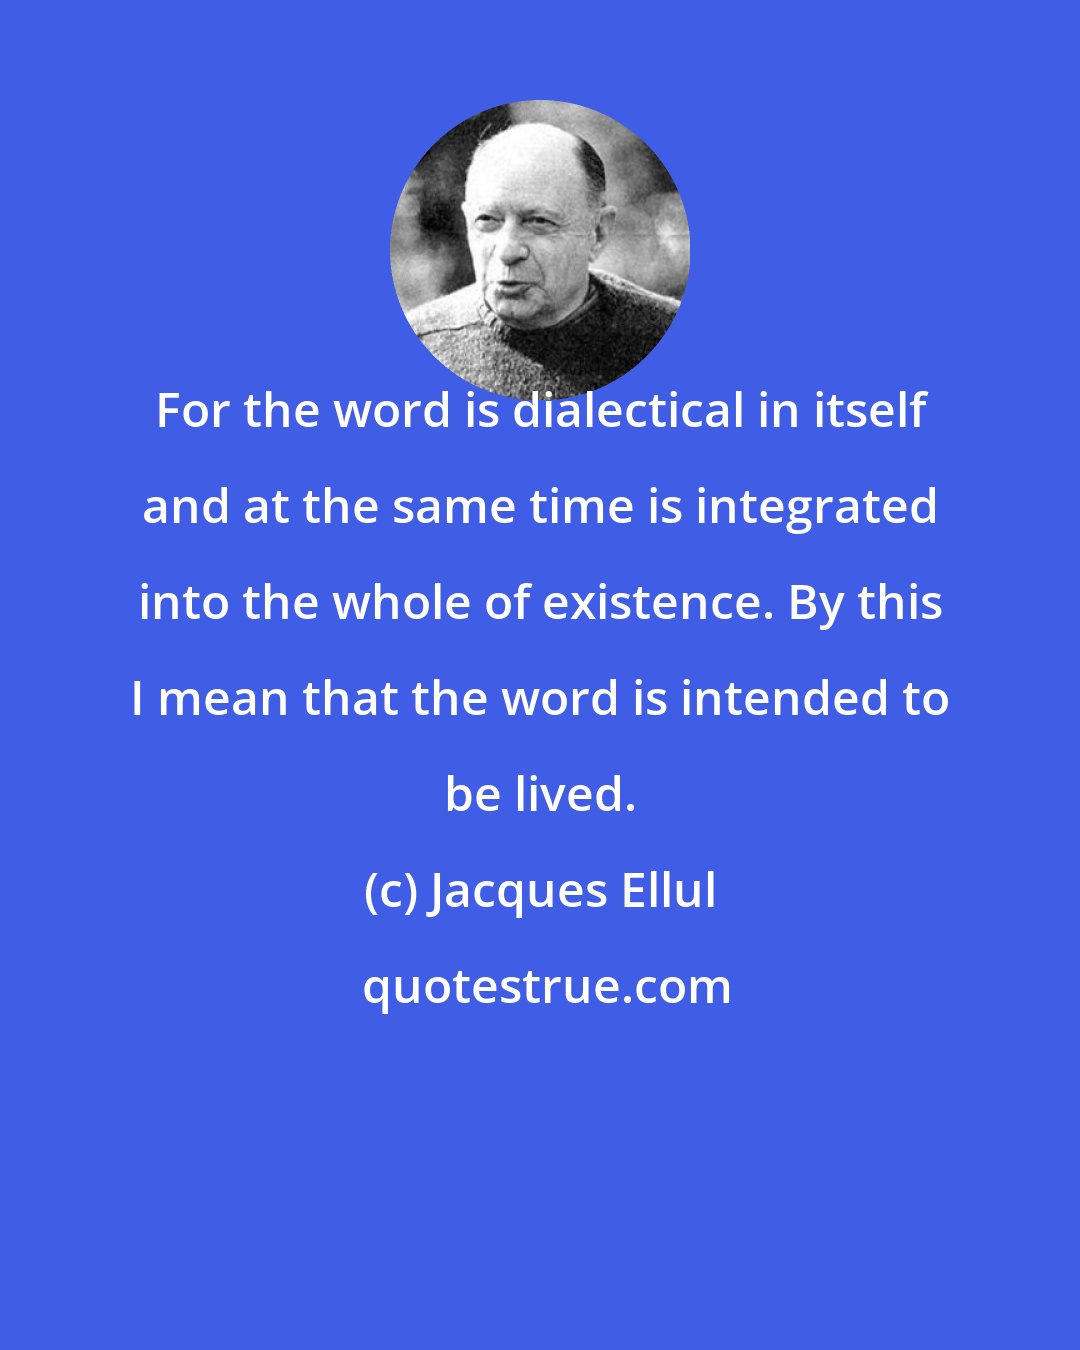 Jacques Ellul: For the word is dialectical in itself and at the same time is integrated into the whole of existence. By this I mean that the word is intended to be lived.